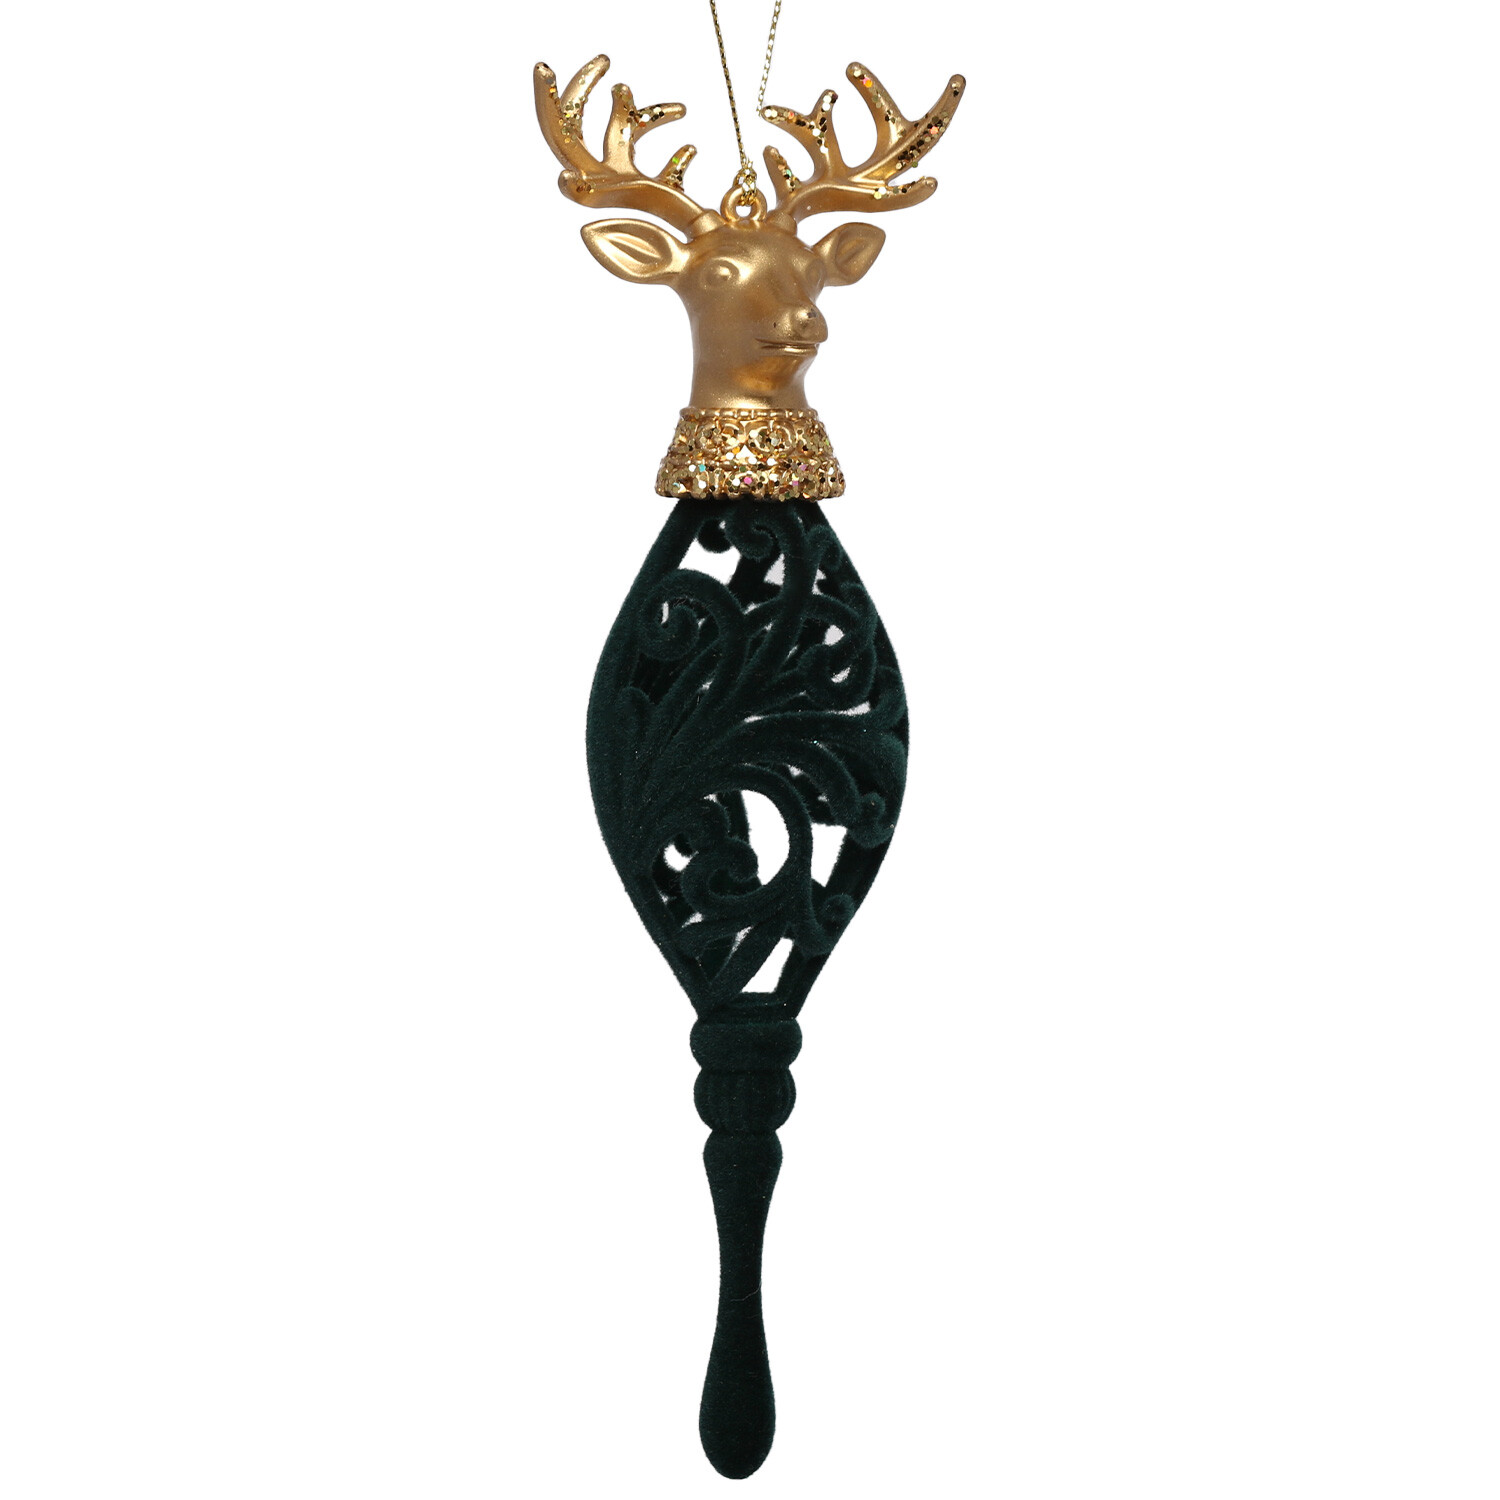 Royal Emerald Green Flocked Stag Bauble Image 1